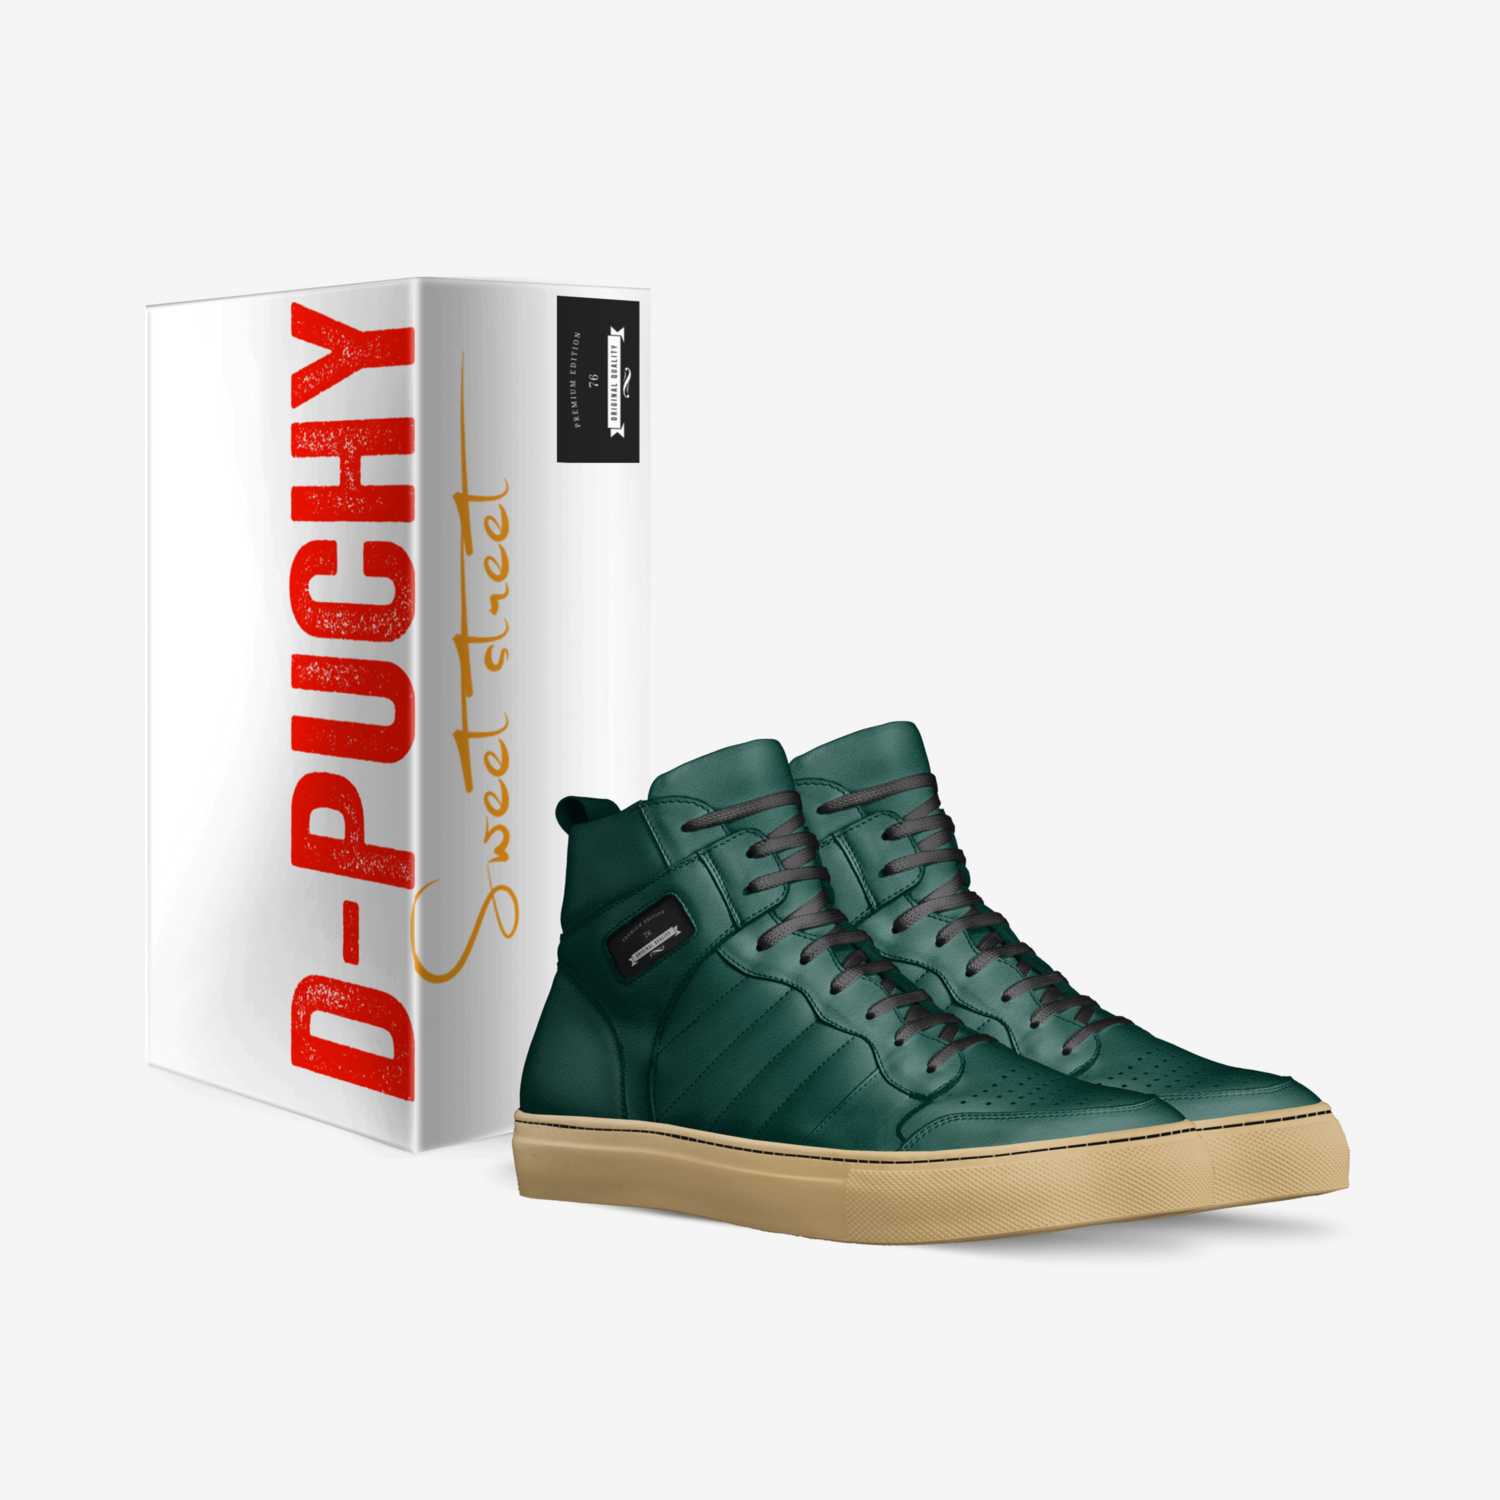 76 custom made in Italy shoes by Dannyc Normandin | Box view